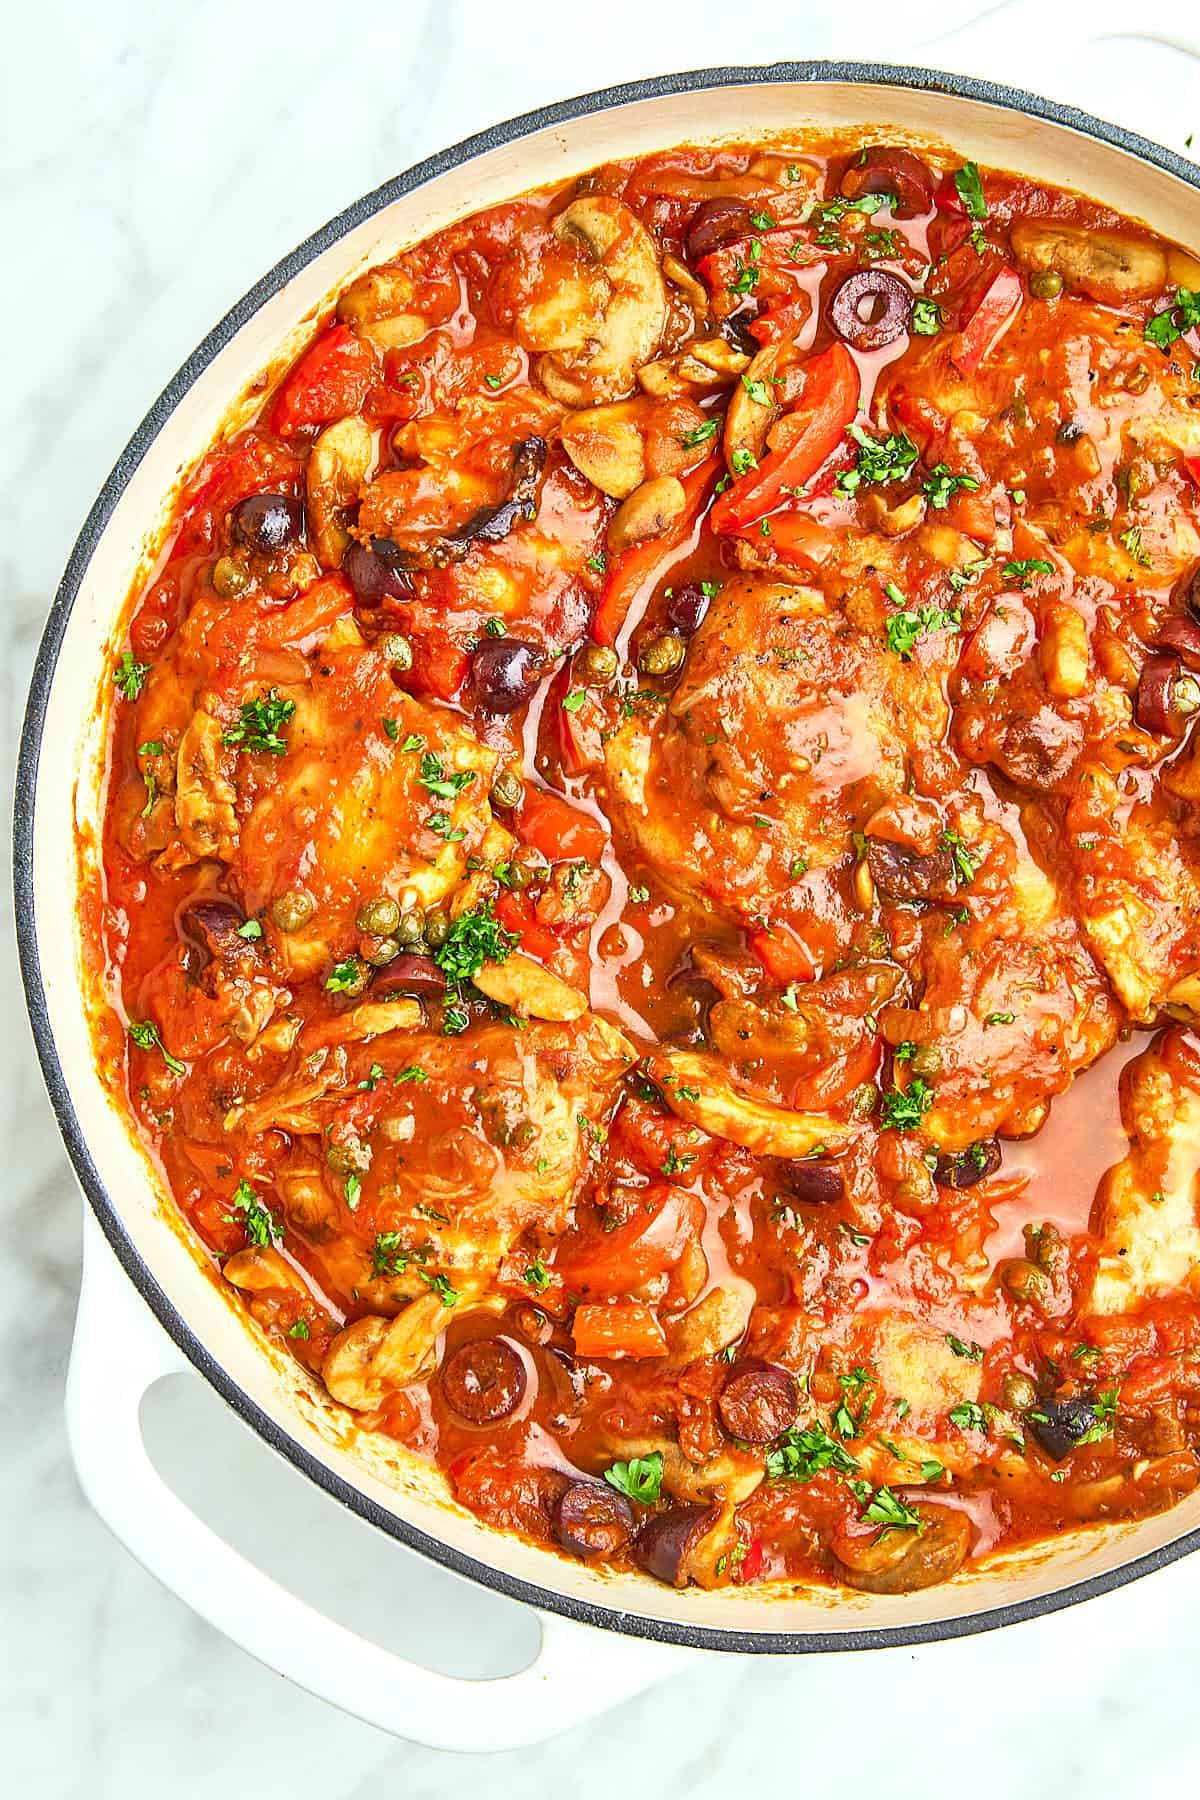 Top down view of a skillet with Chicken Cacciatore.